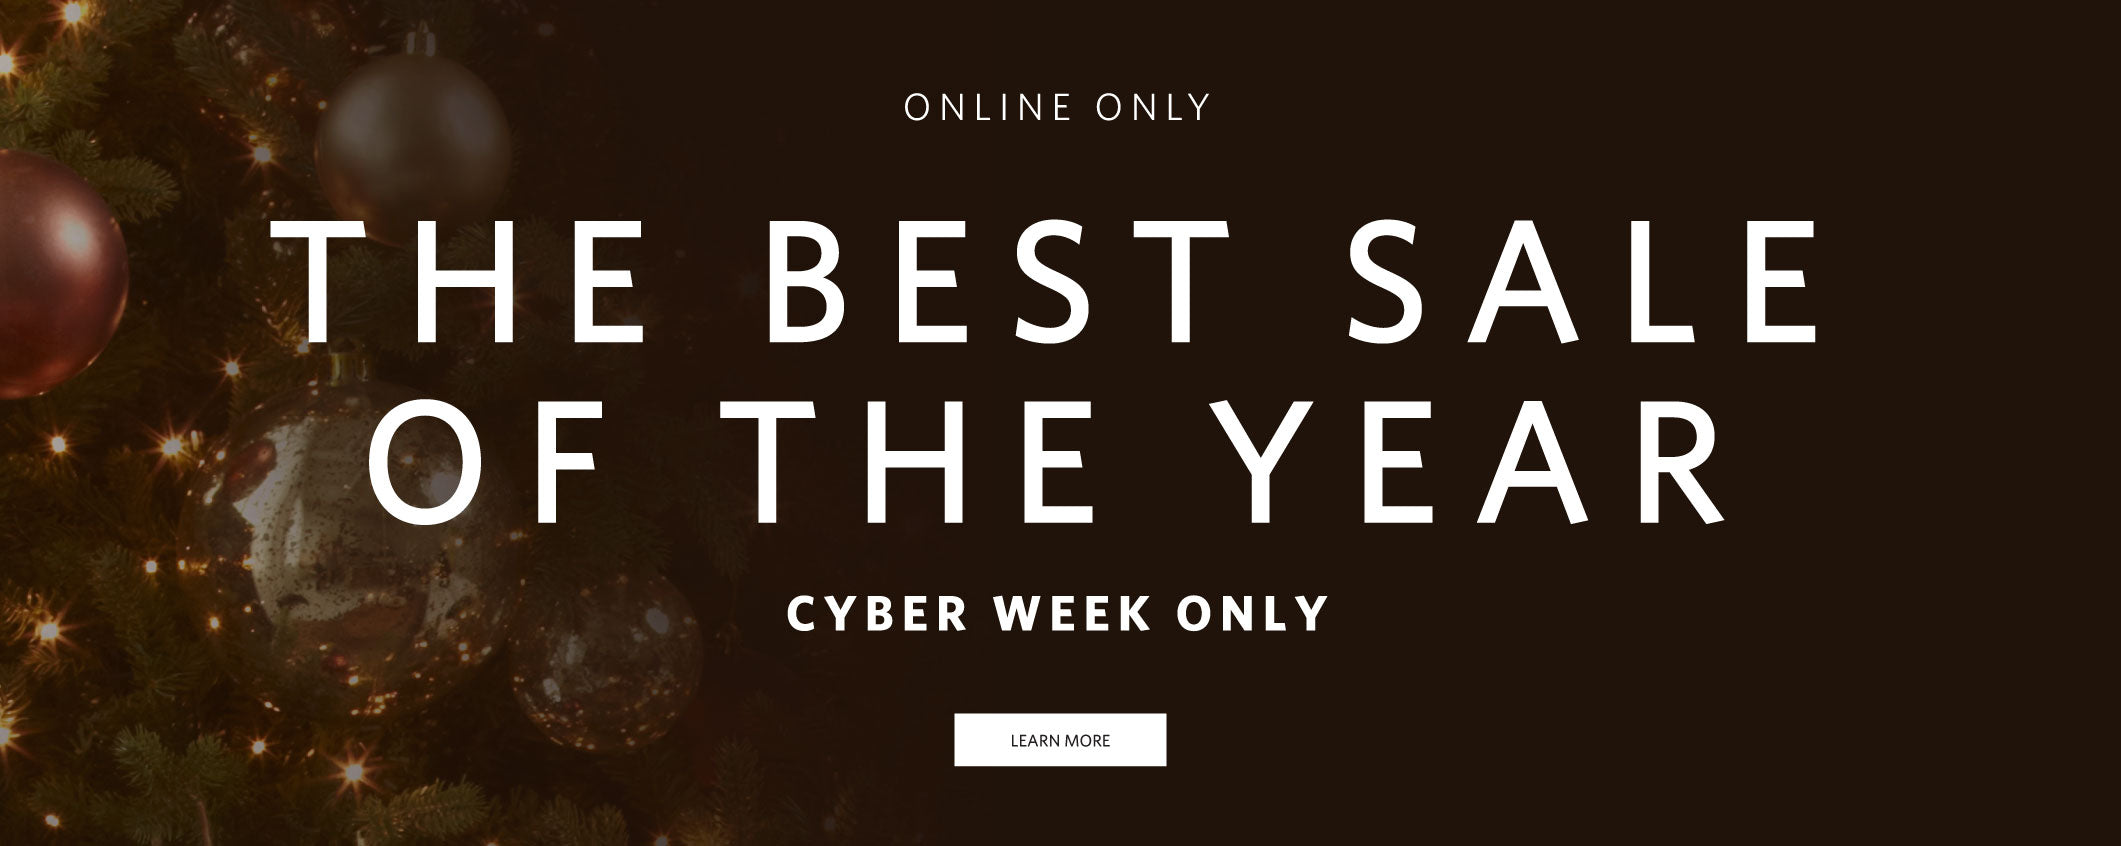 Cyber Monday Sale week. Save up to $750 off